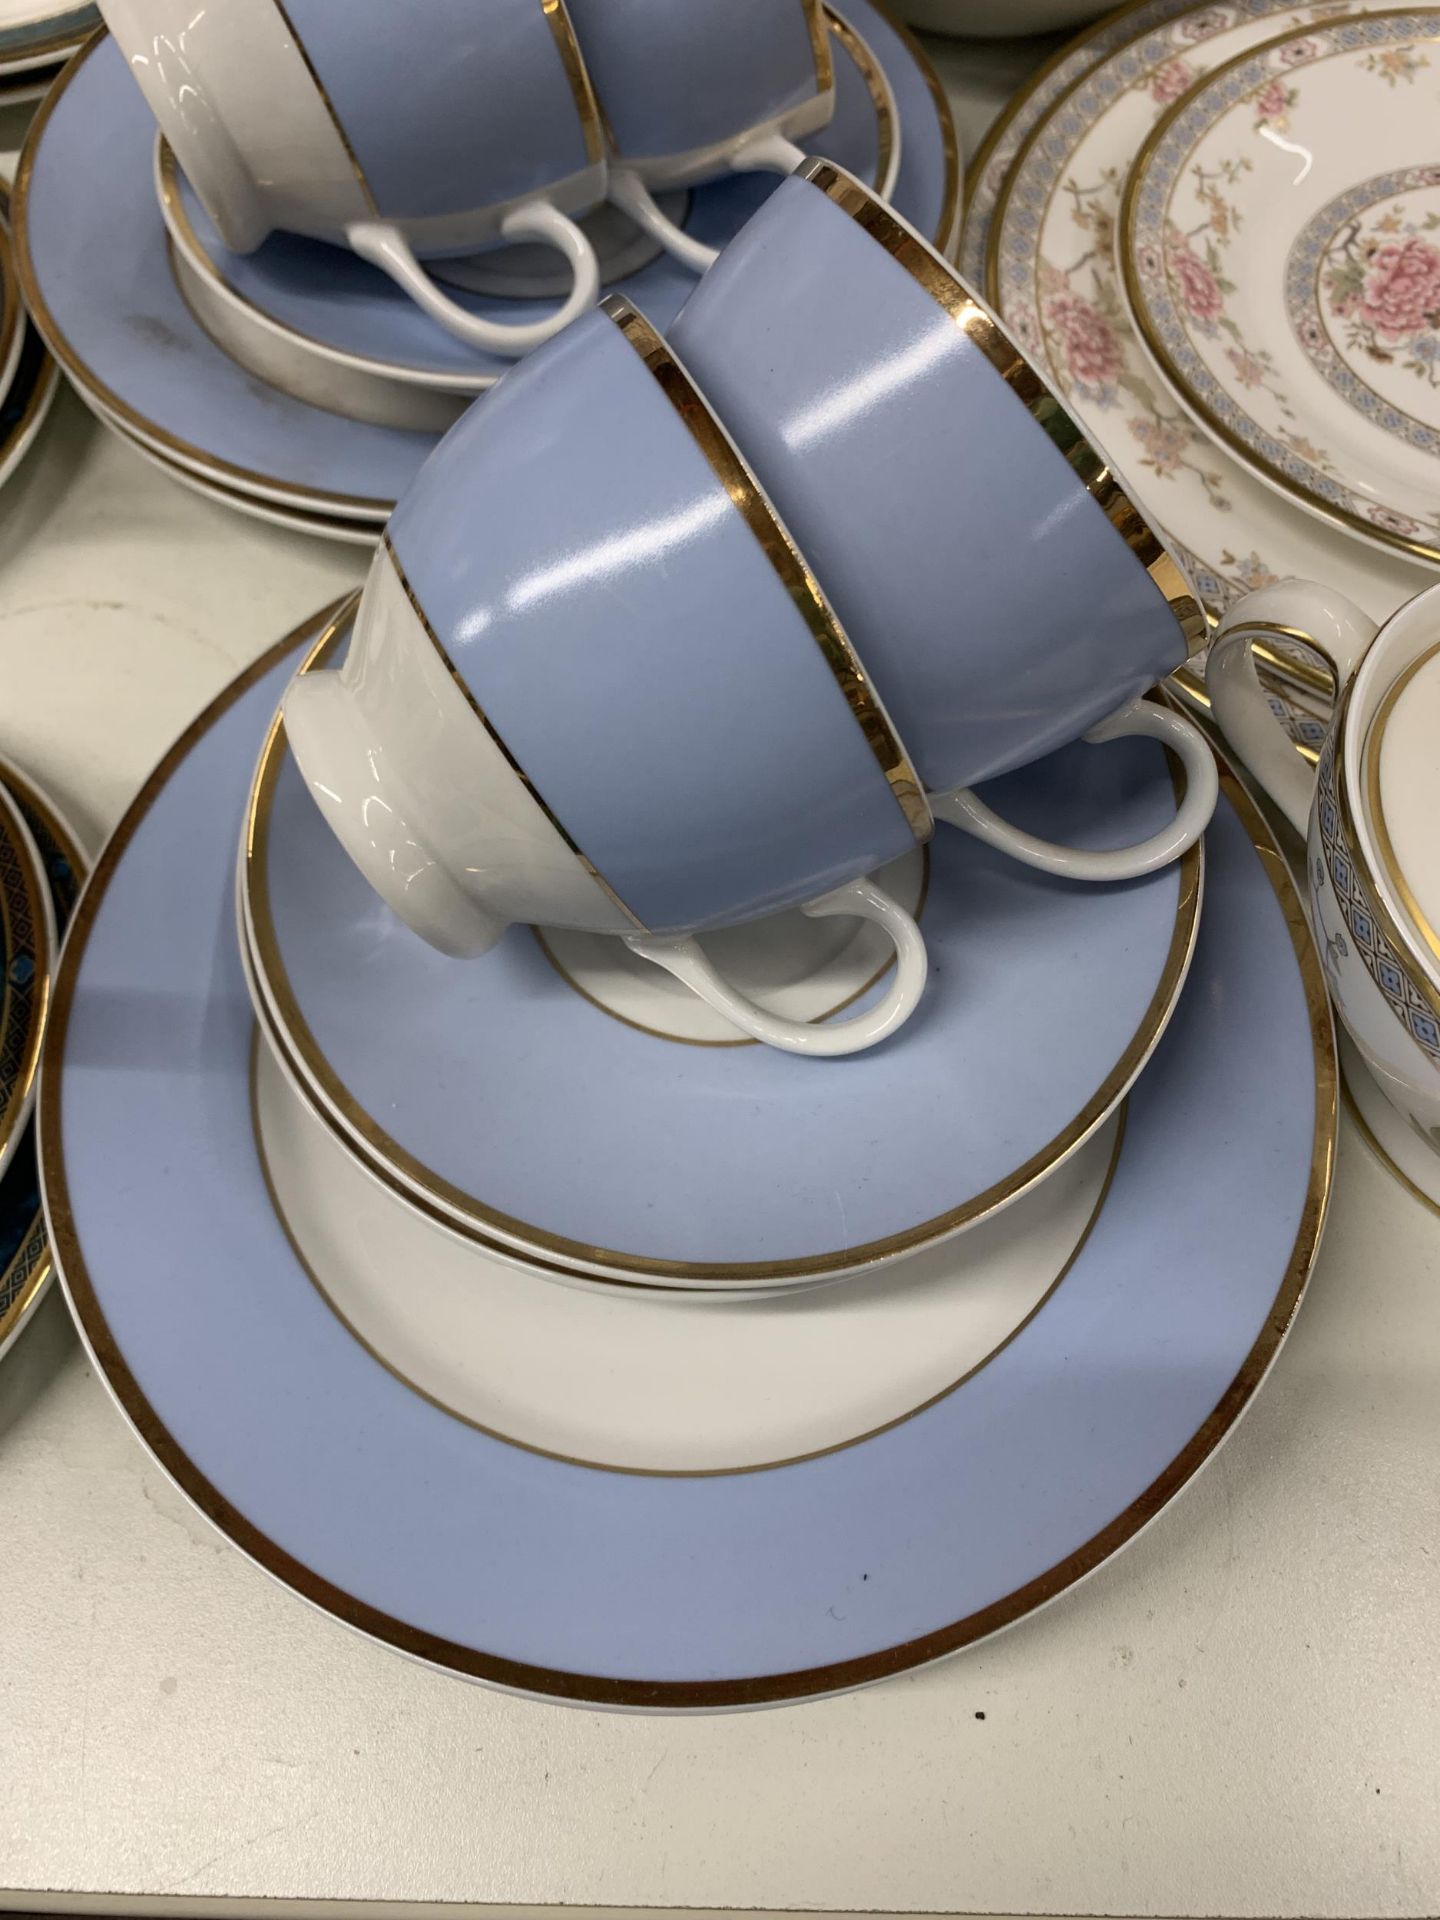 A QUANTITY OF ROYAL DOULTON TEAWARE TO INCLUDE 'CANTON', PLATES, A LARGE BOWL, PLANTER LIDDED - Image 4 of 7